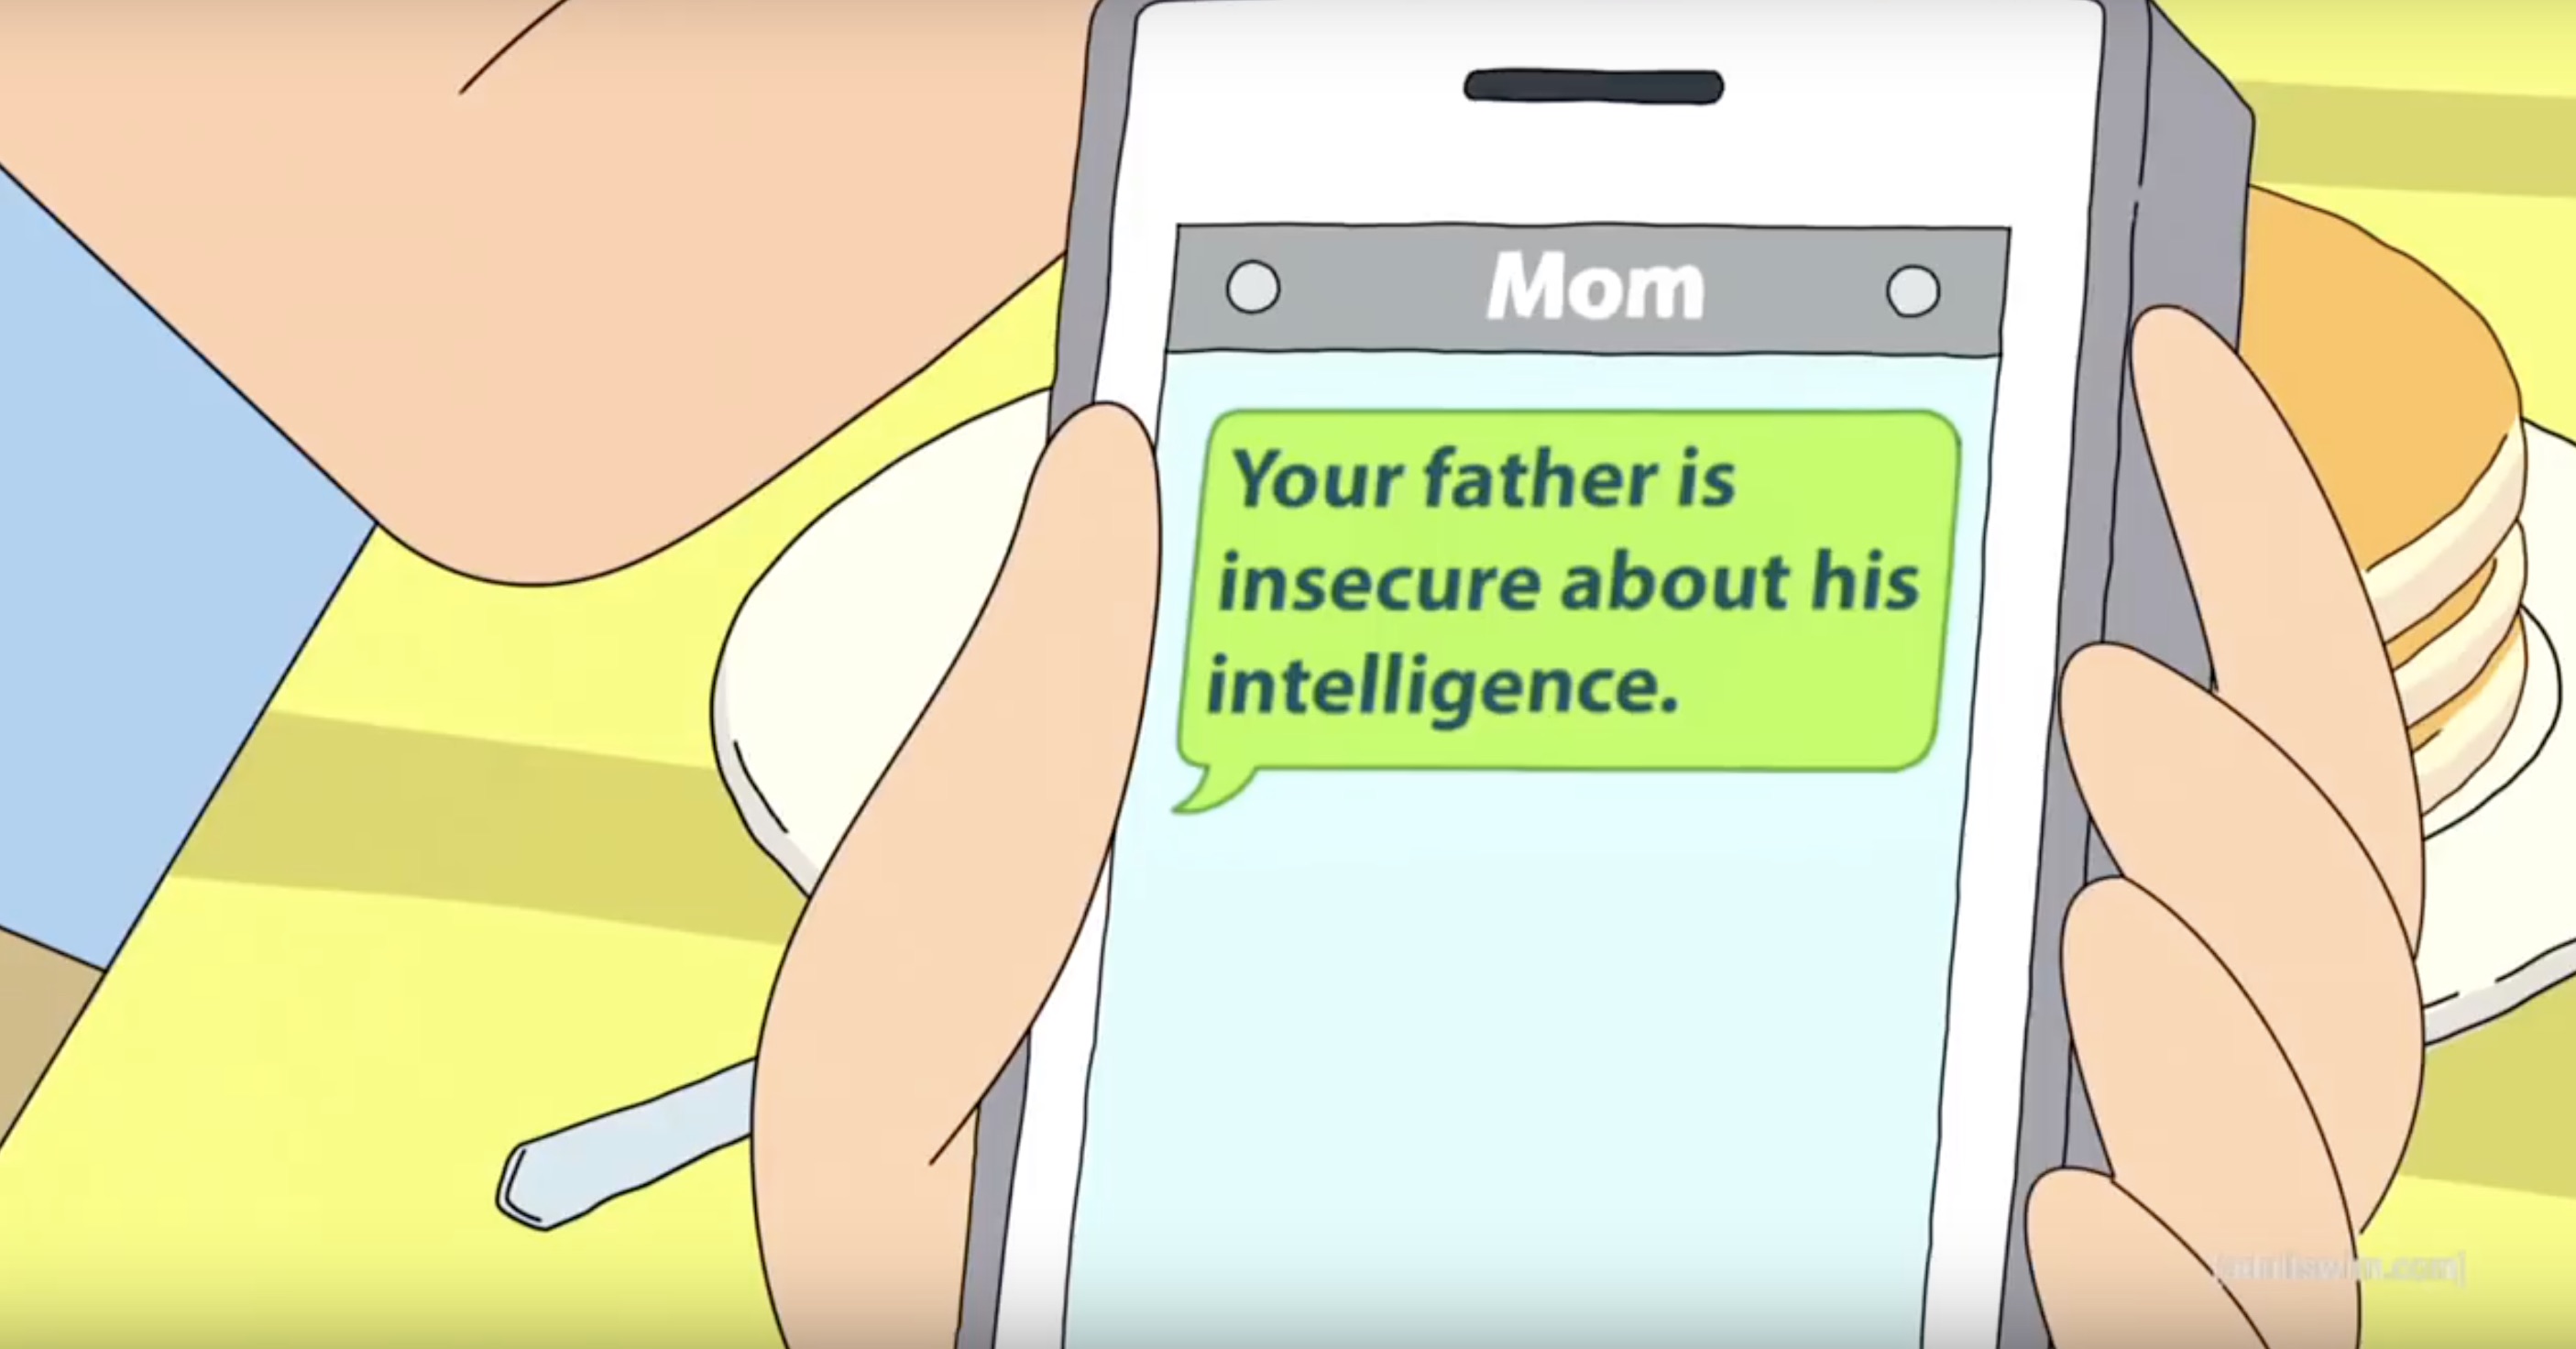 A cartoon image of a text message from "Mom" that says, "Your father is insecure about his intelligence."